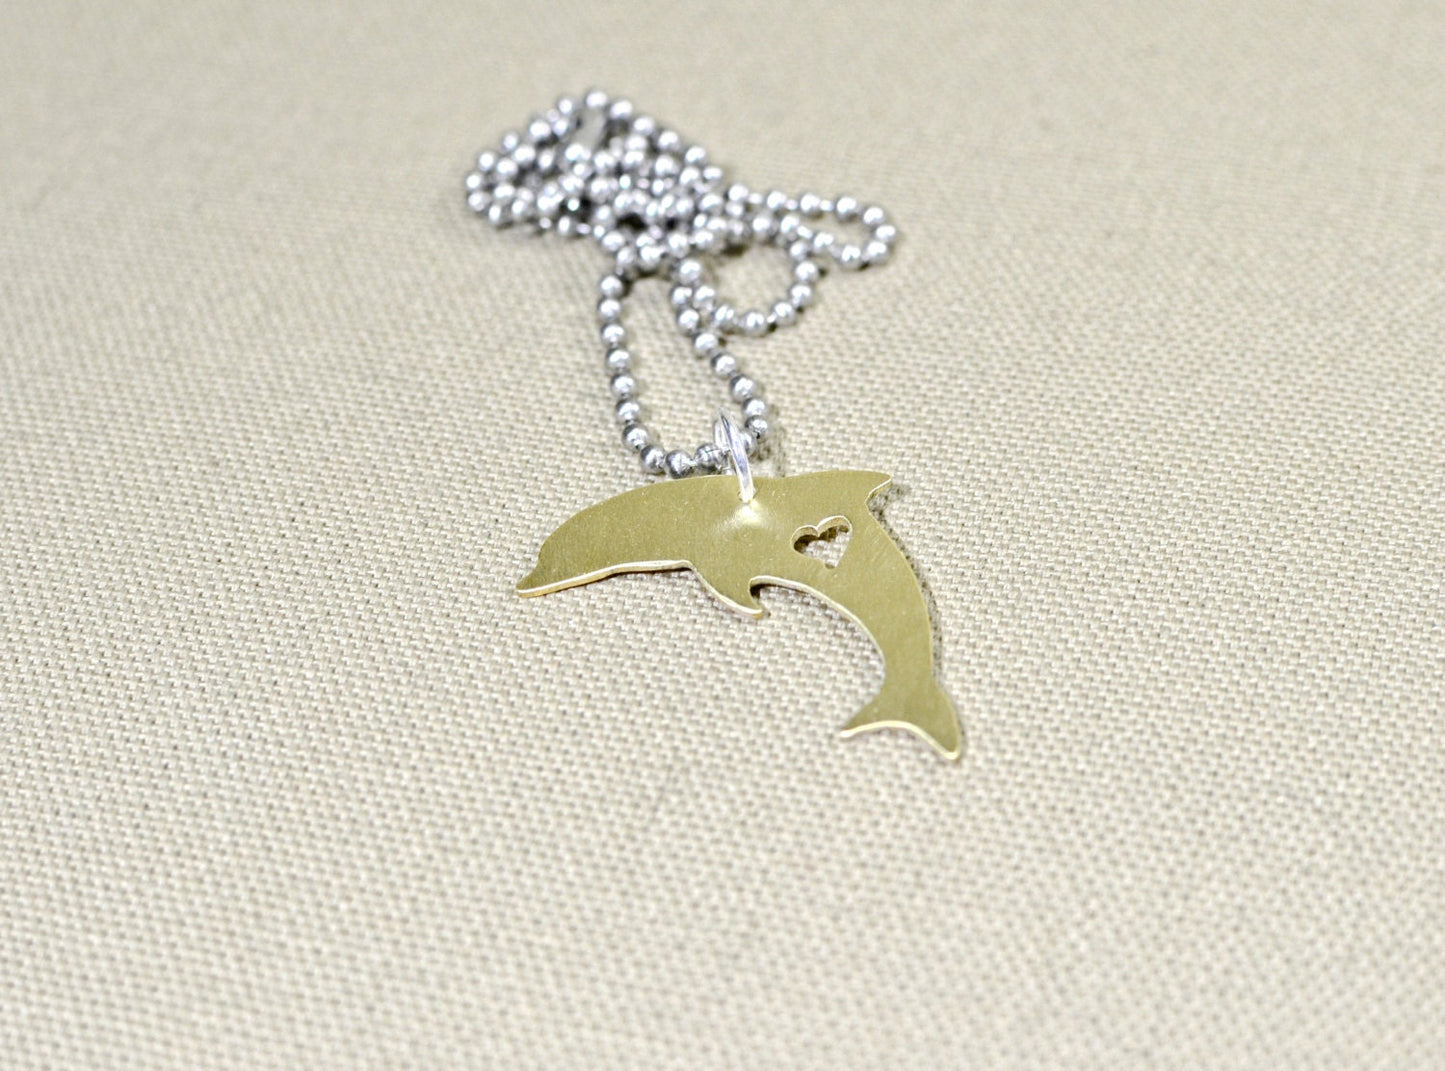 Dolphin necklace in various metals